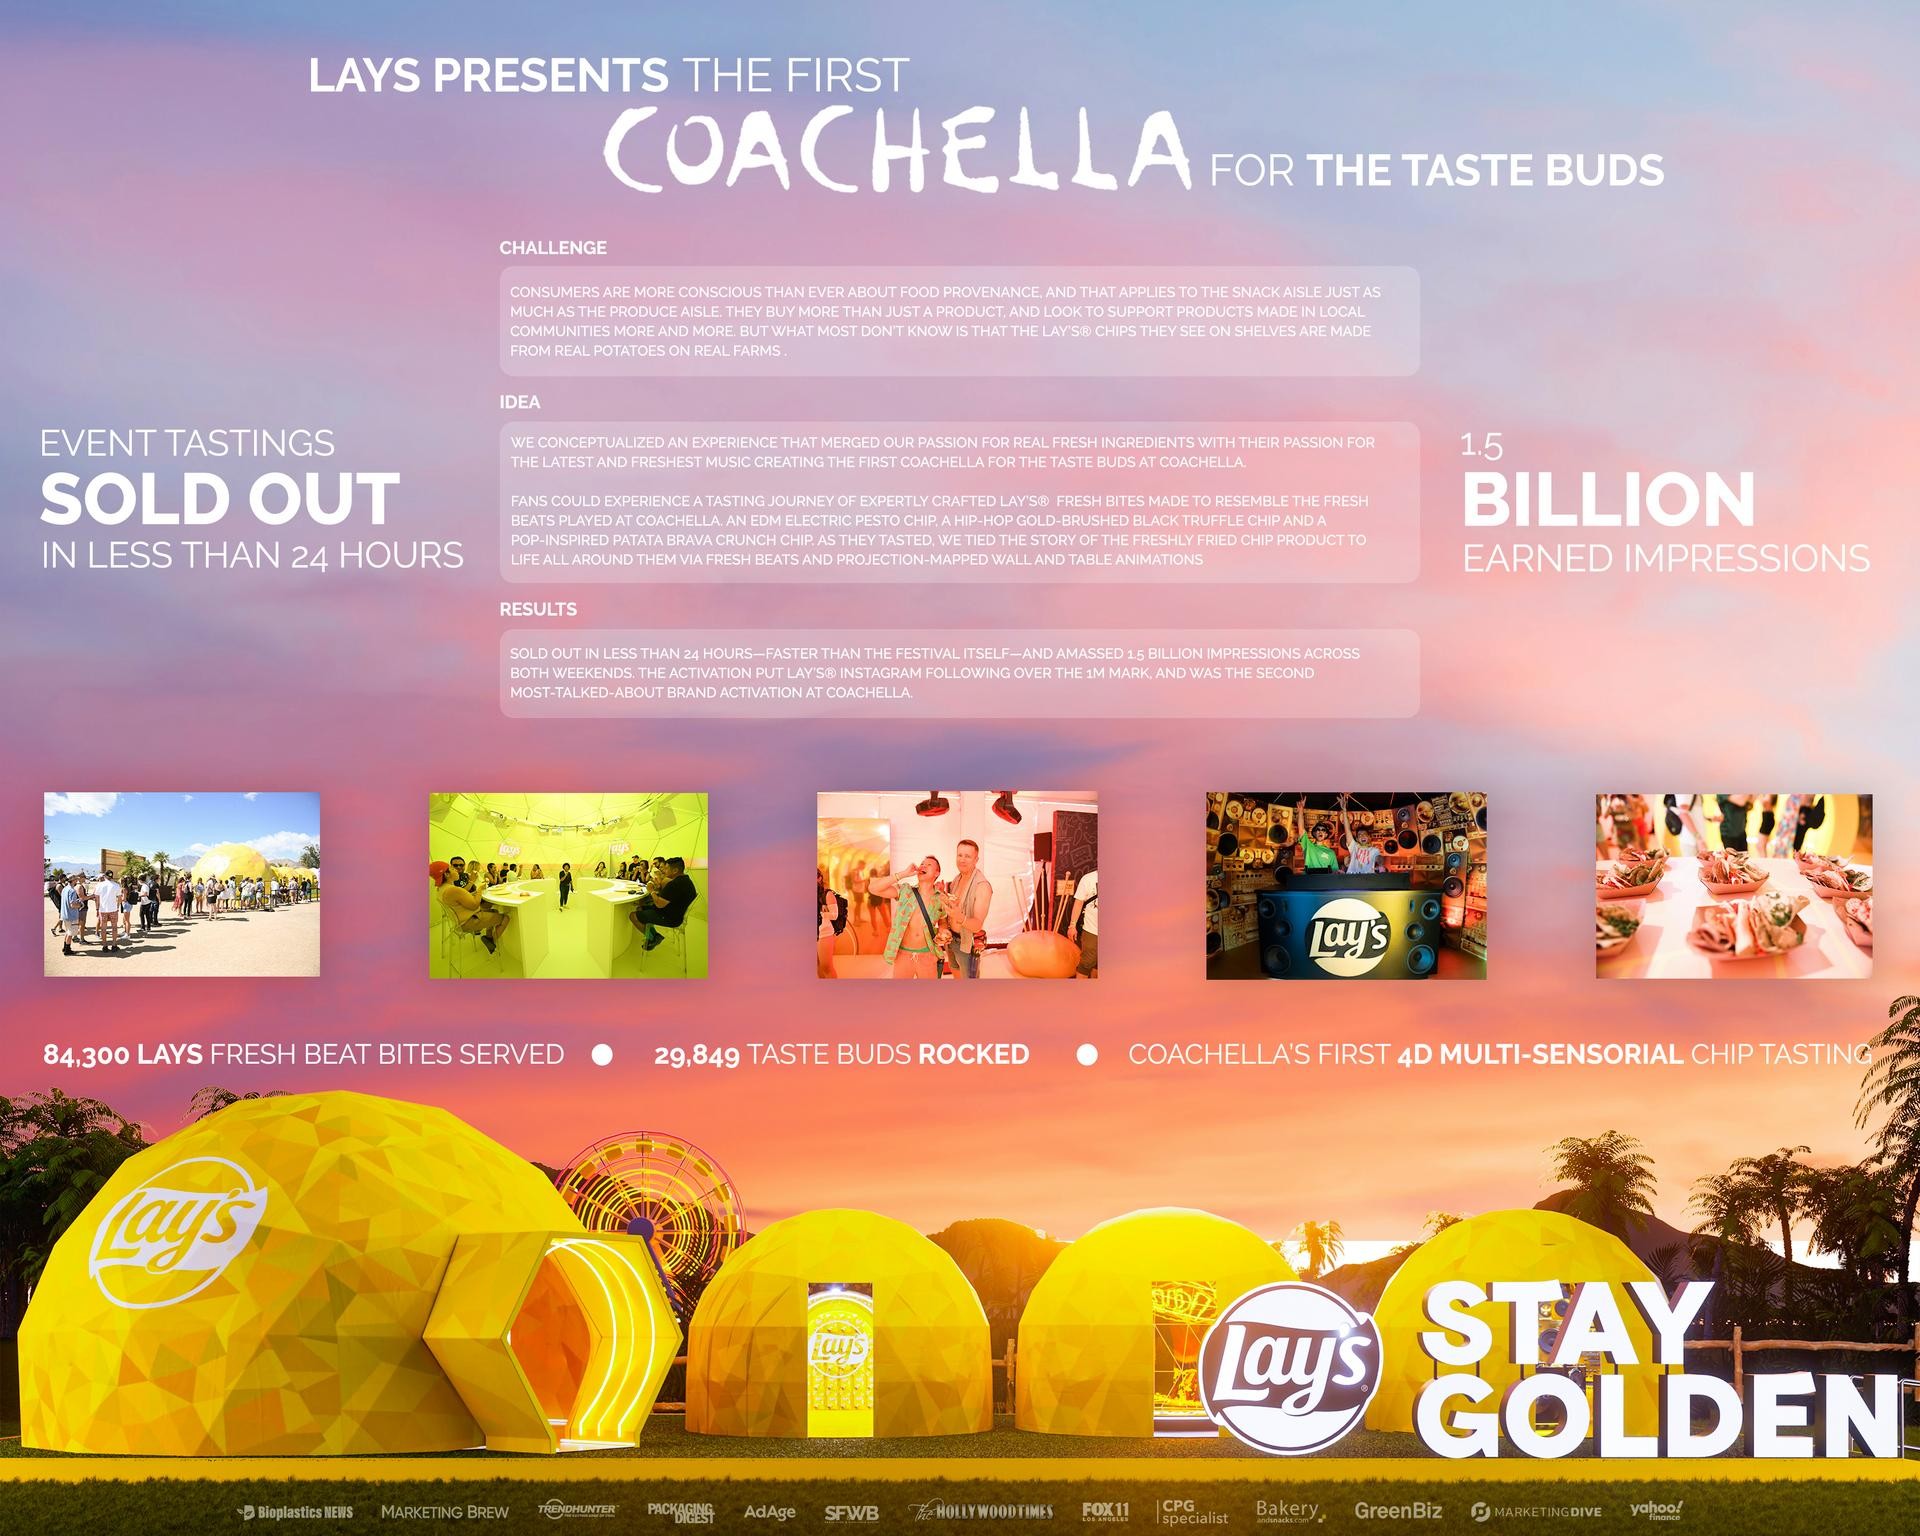 LAY'S FIRST COACHELLA FOR THE TASTE BUDS